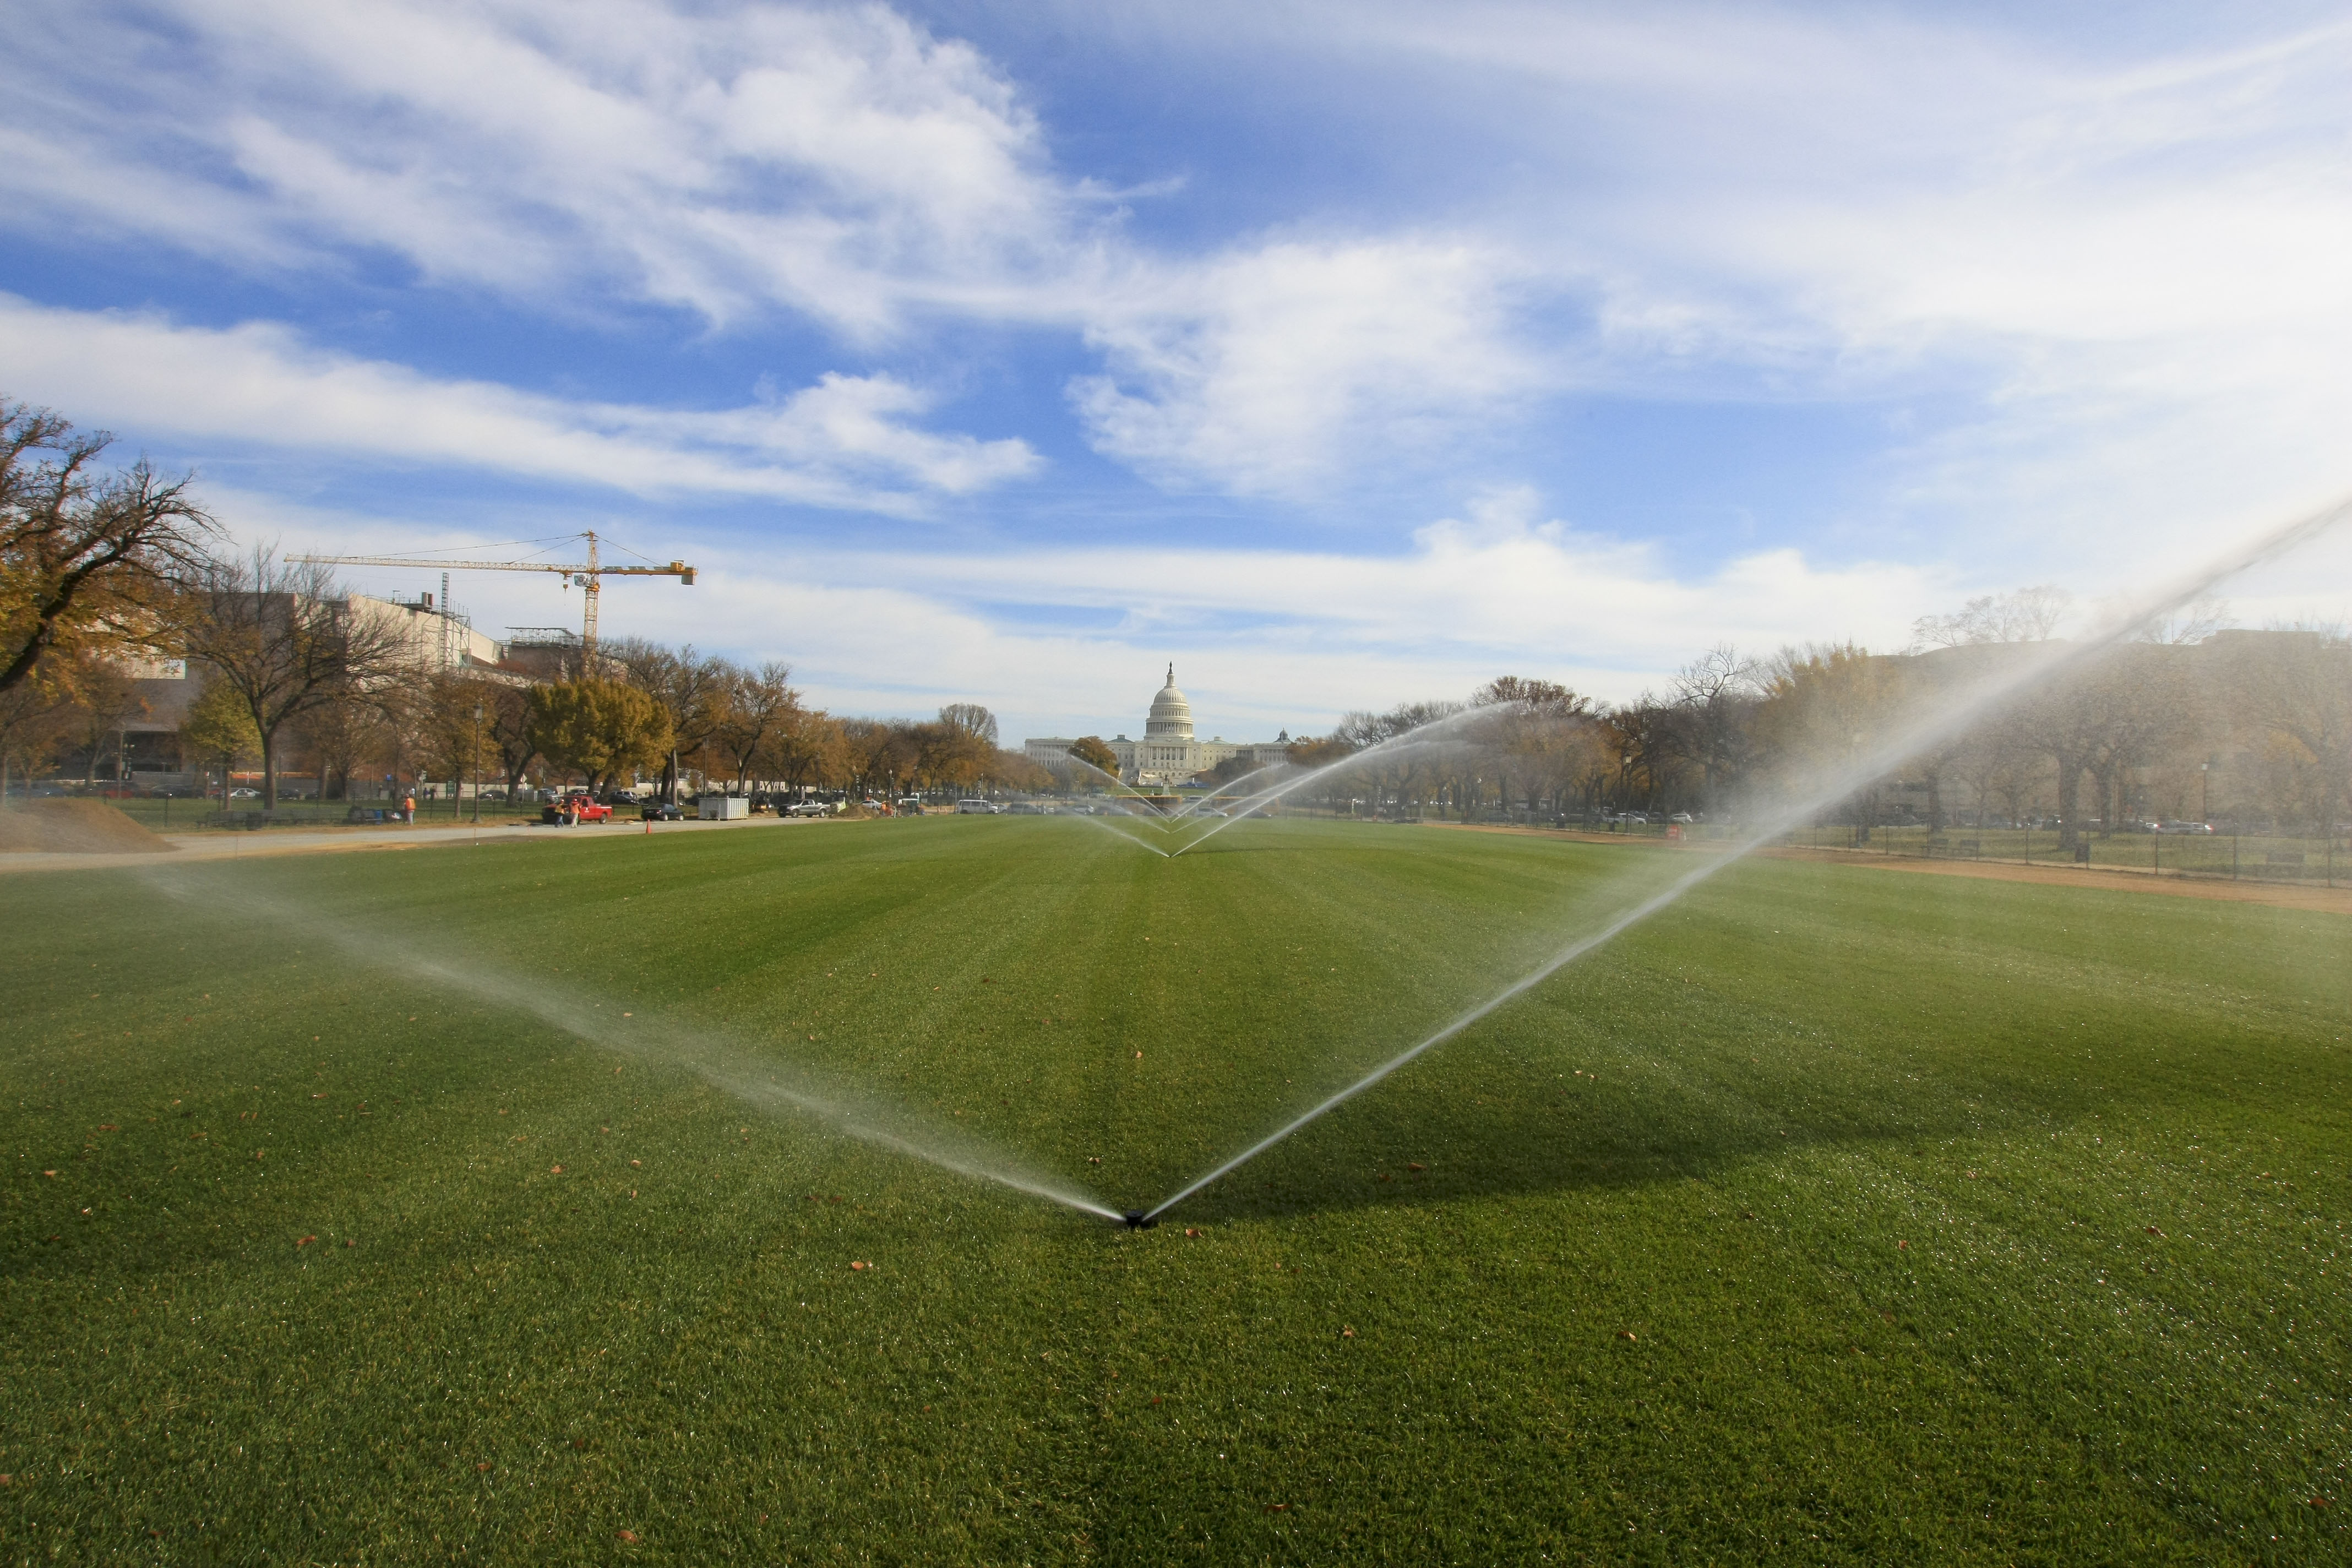 The newly renovated National Mall in Washington, D.C. now features a state-of-the-art Rain Bird irrigation system.